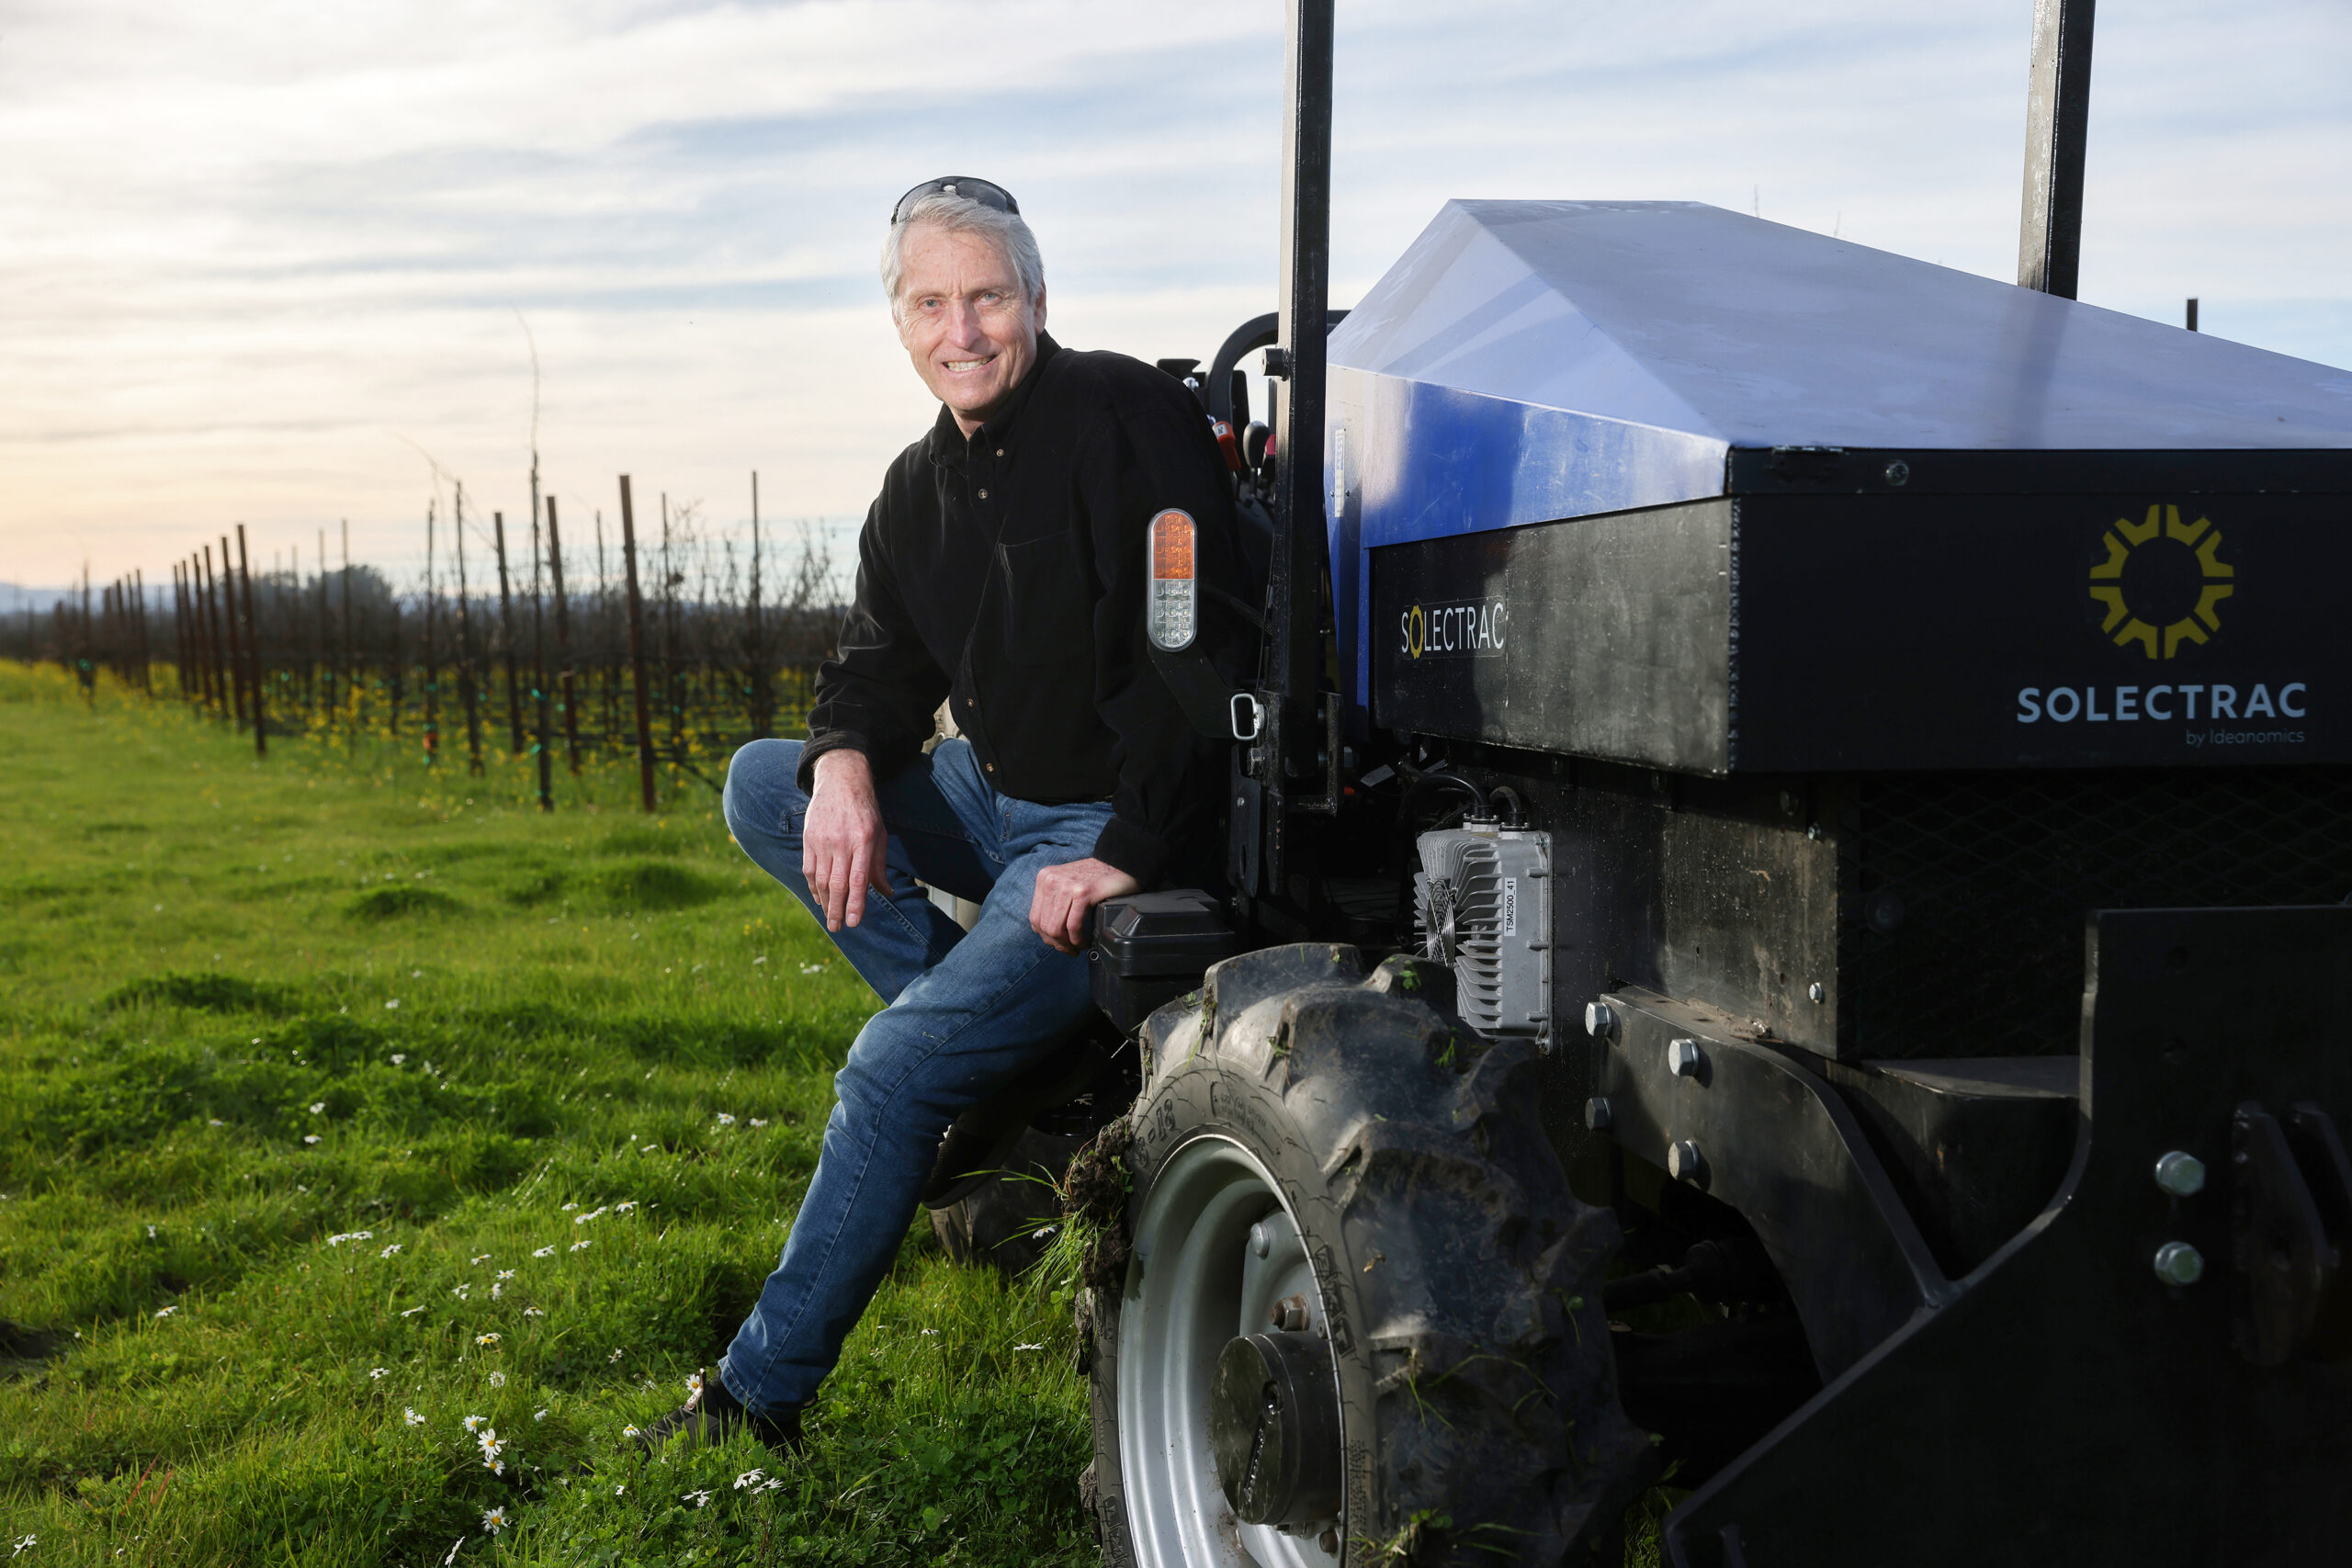 Steve Heckeroth is the founder and chief innovation officer of Solectrac, which produces electric tractors. (Christopher Chung/ The Press Democrat)